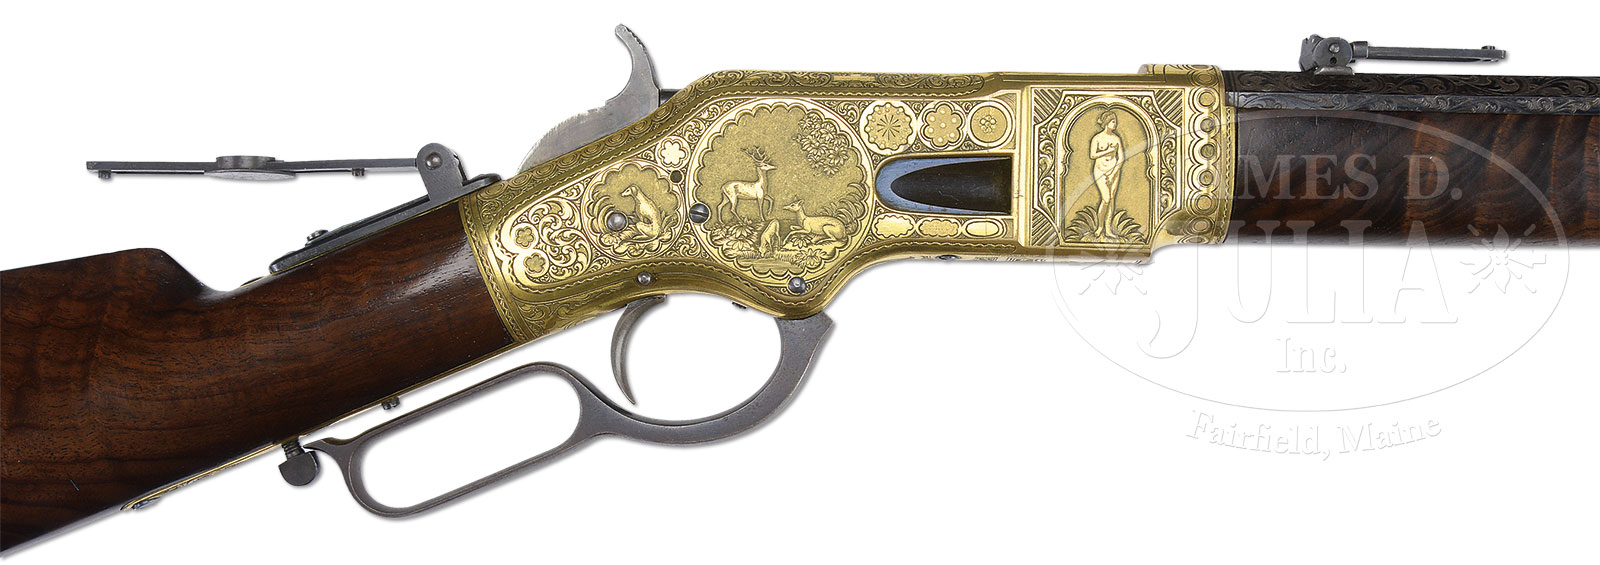 POSSIBLY CONRAD ULRICH’S GREATEST MASTERPIECE AND A LEGENDARY WINCHESTER COLLECTOR’S ICON FOR NEARLY HALF A CENTURY IS THE MAGNIFICENT GILDED HIGH RELIEF ENGRAVED AND FULLY SIGNED WINCHESTER MODEL 1866 LEVER ACTION RIFLE.